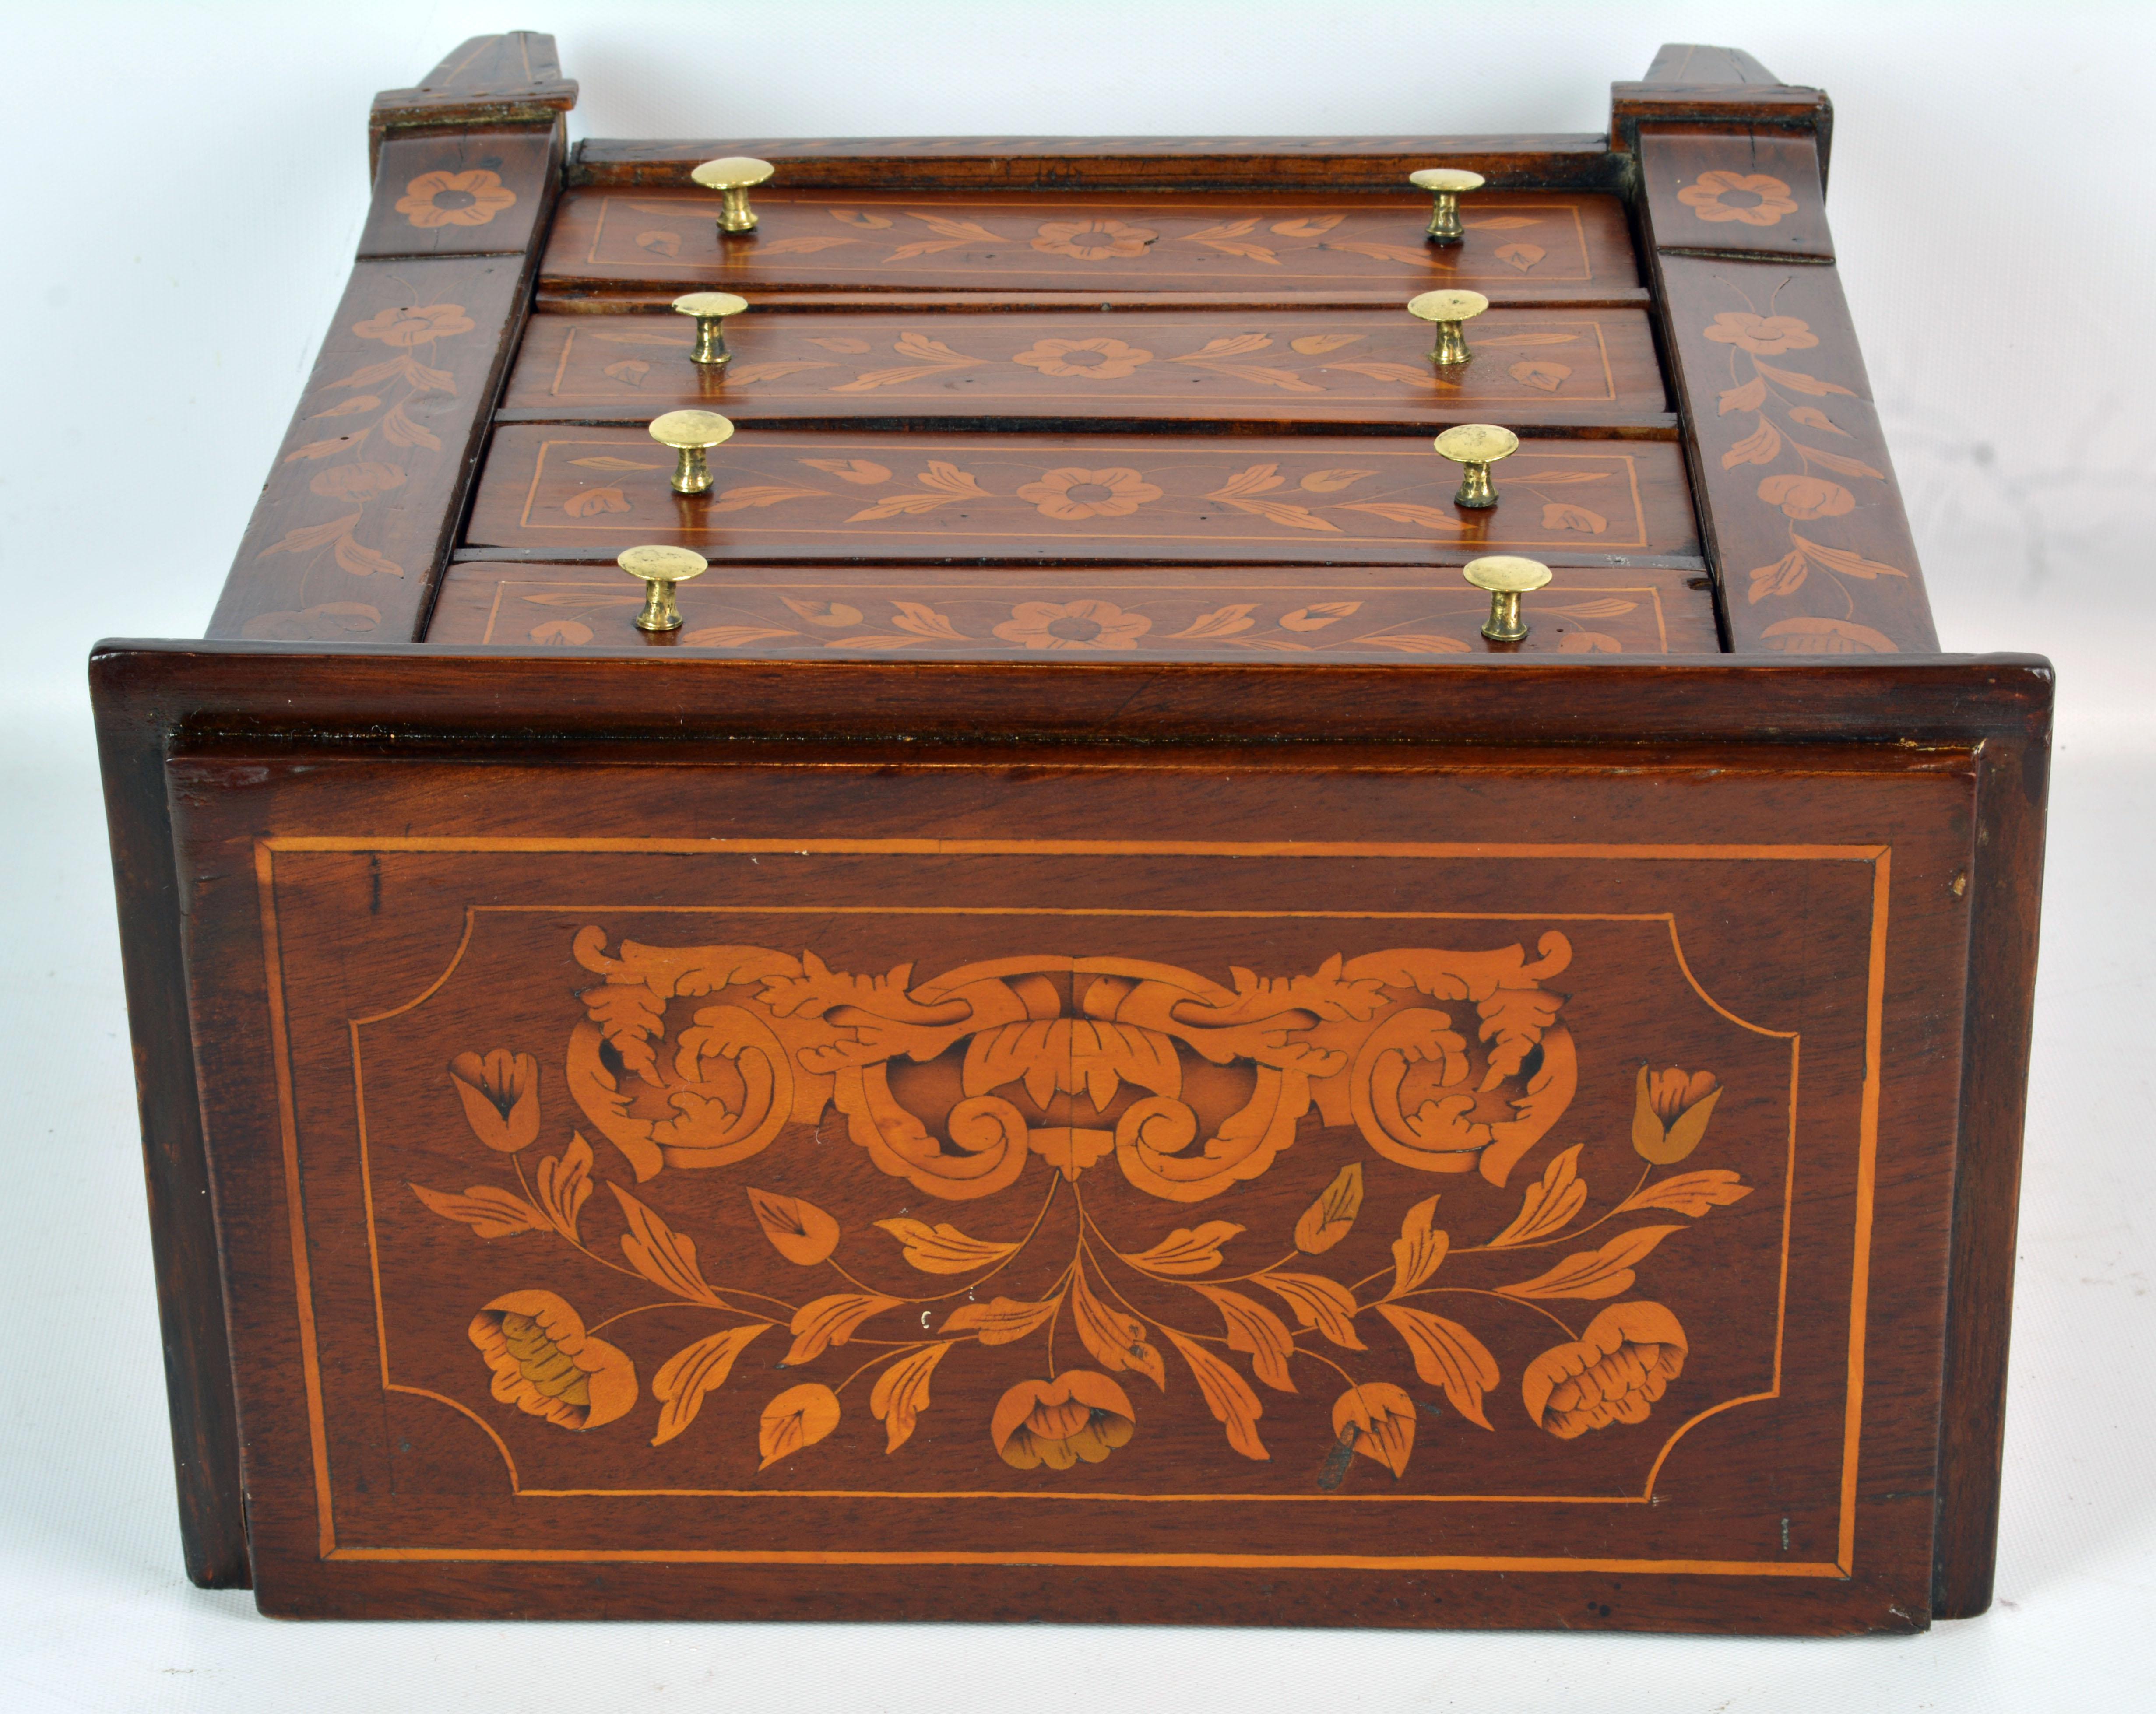 Italian 19th Century Richly Inlaid Miniature Chest of Drawers or Jewelry Chest 3